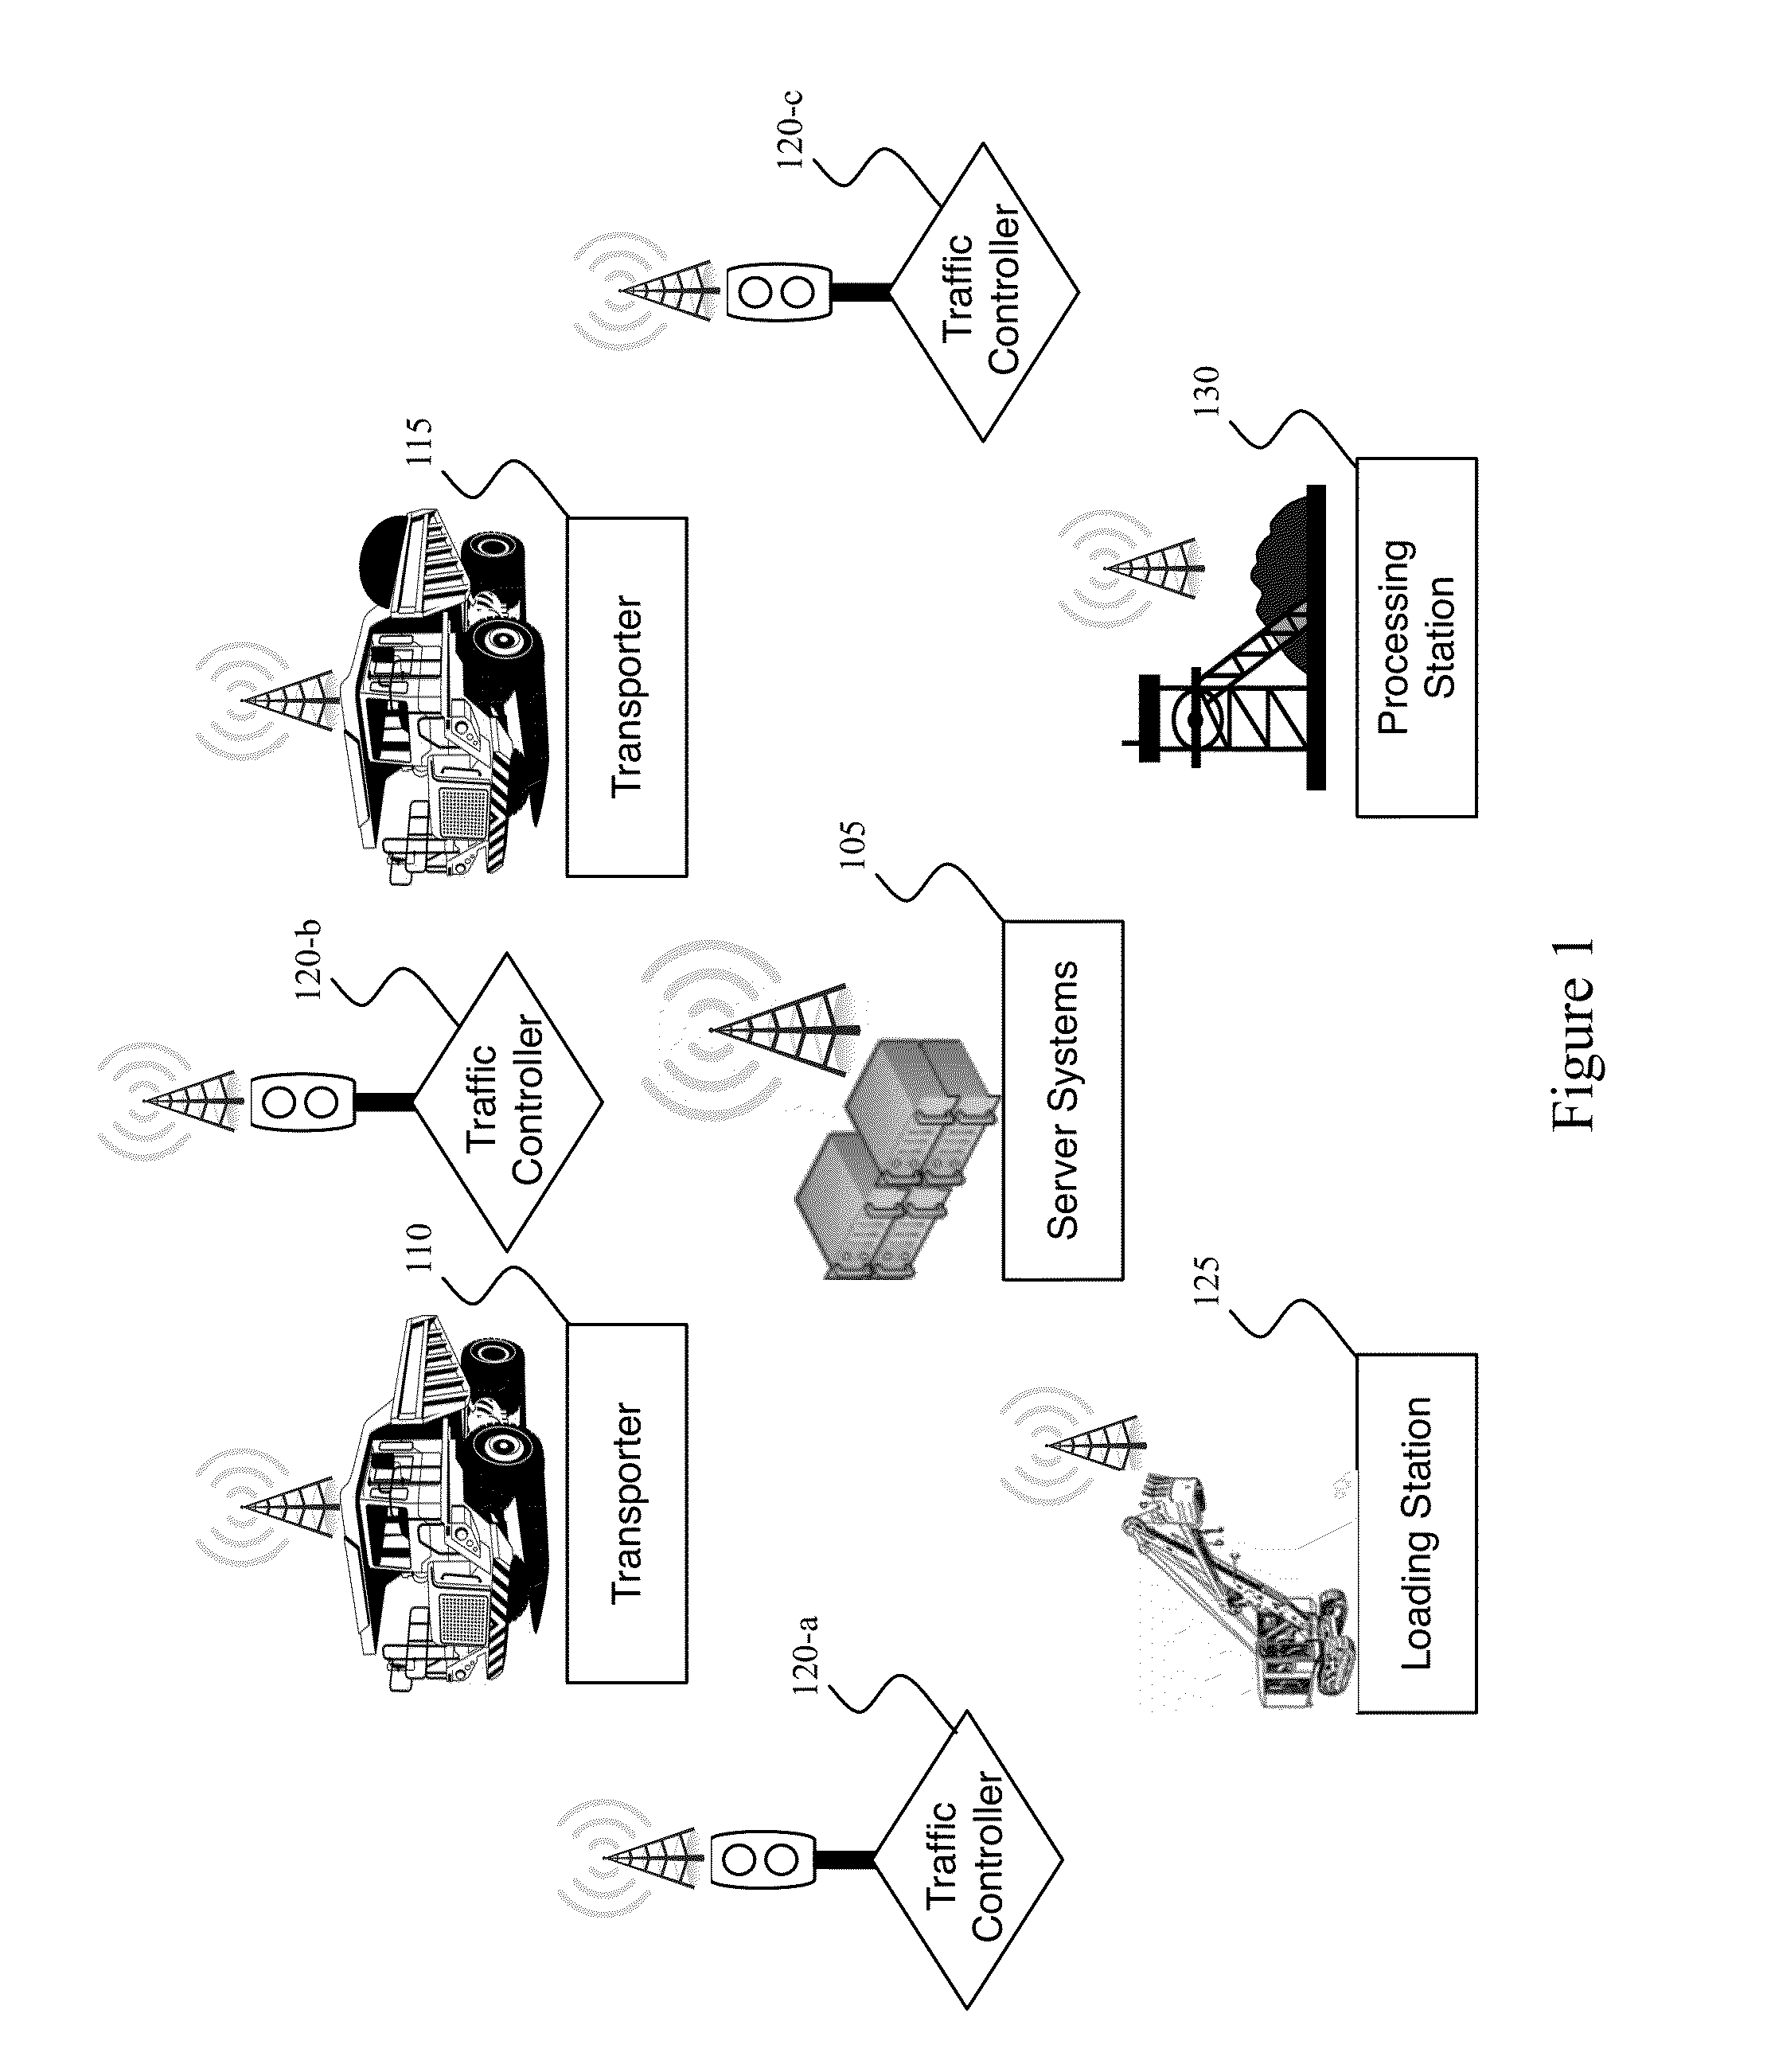 Traffic control system and method of use